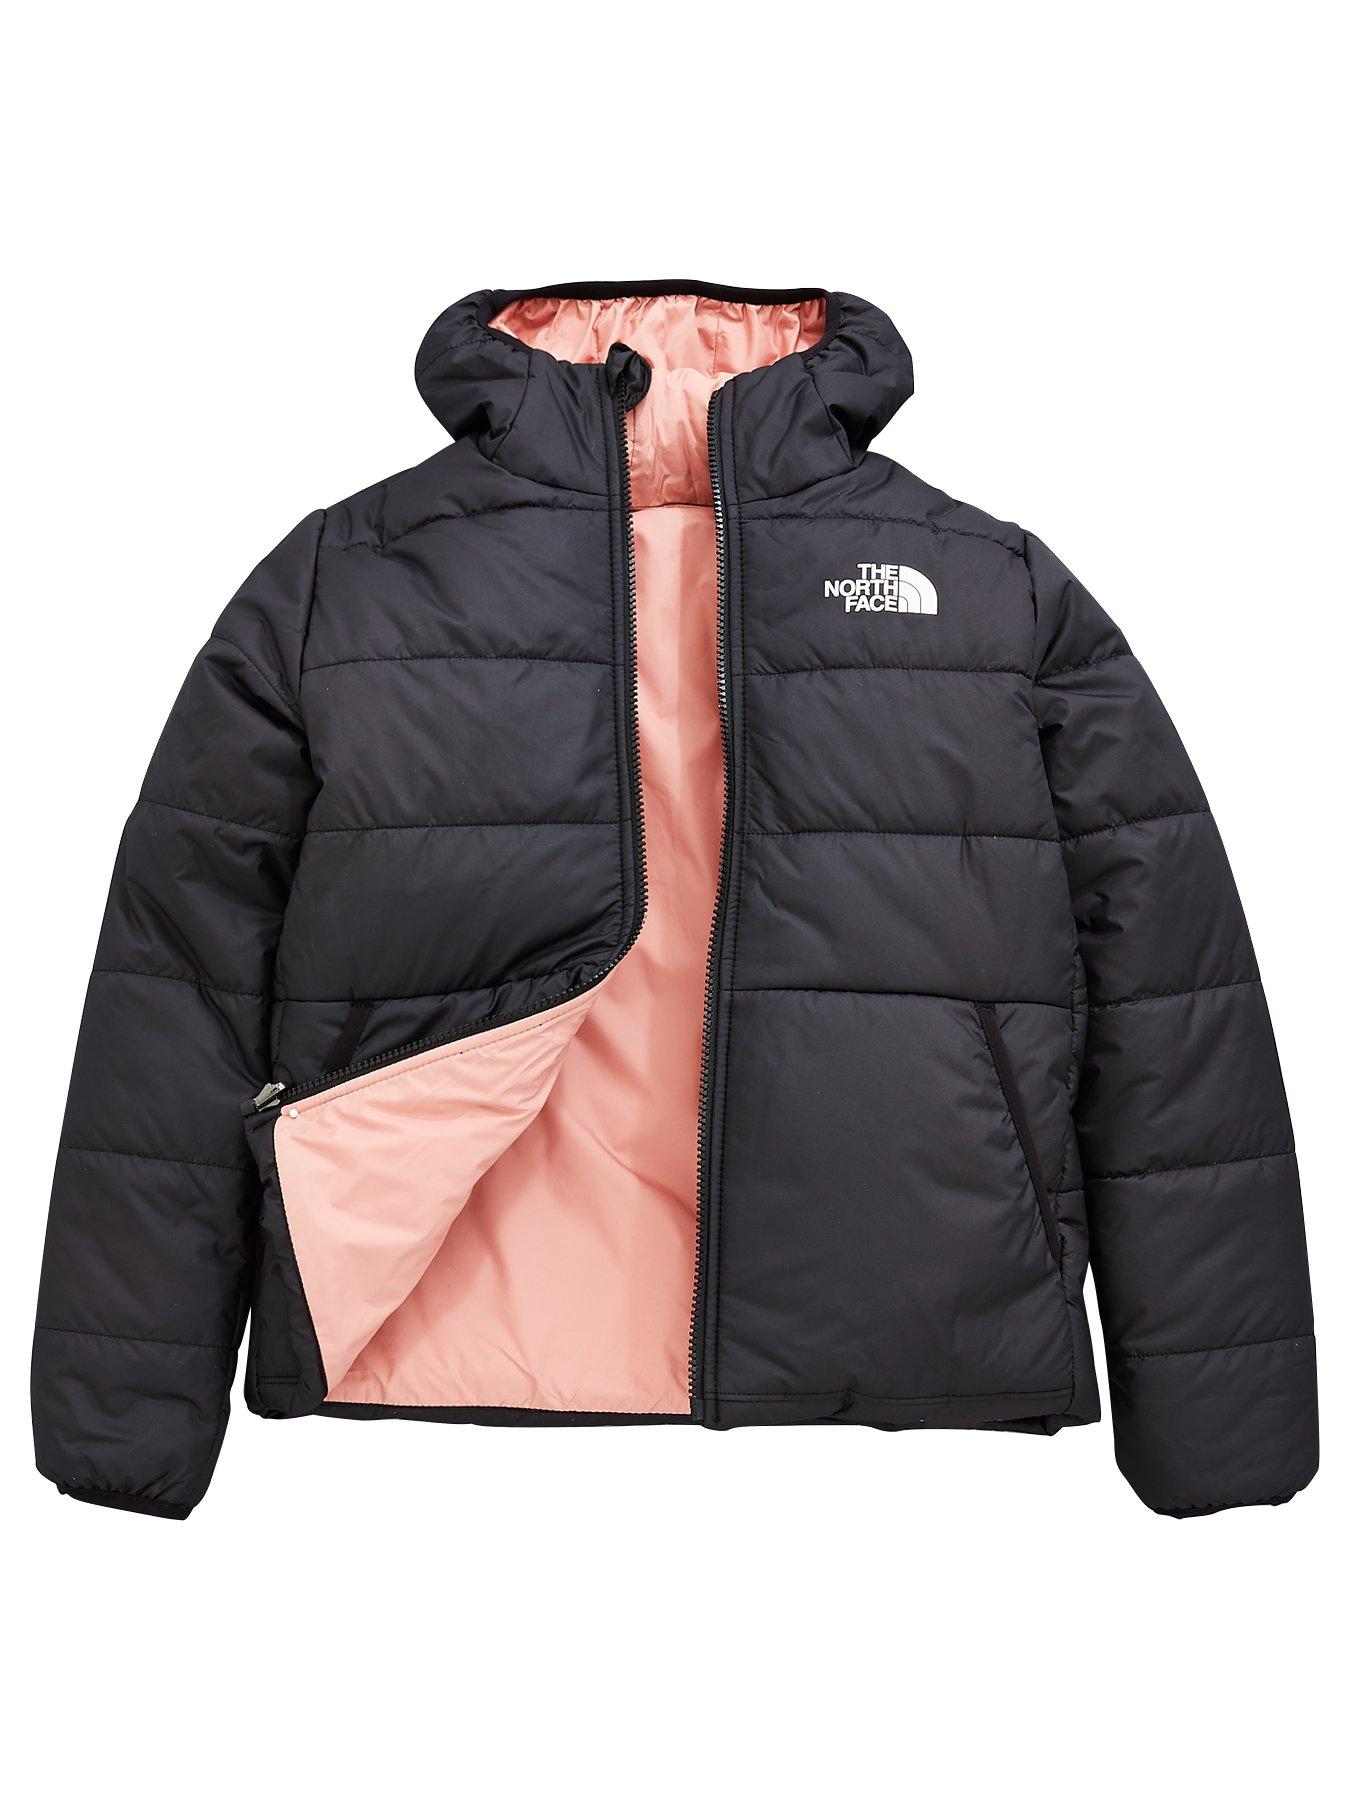 THE NORTH FACE Girls Reversible Perrito 